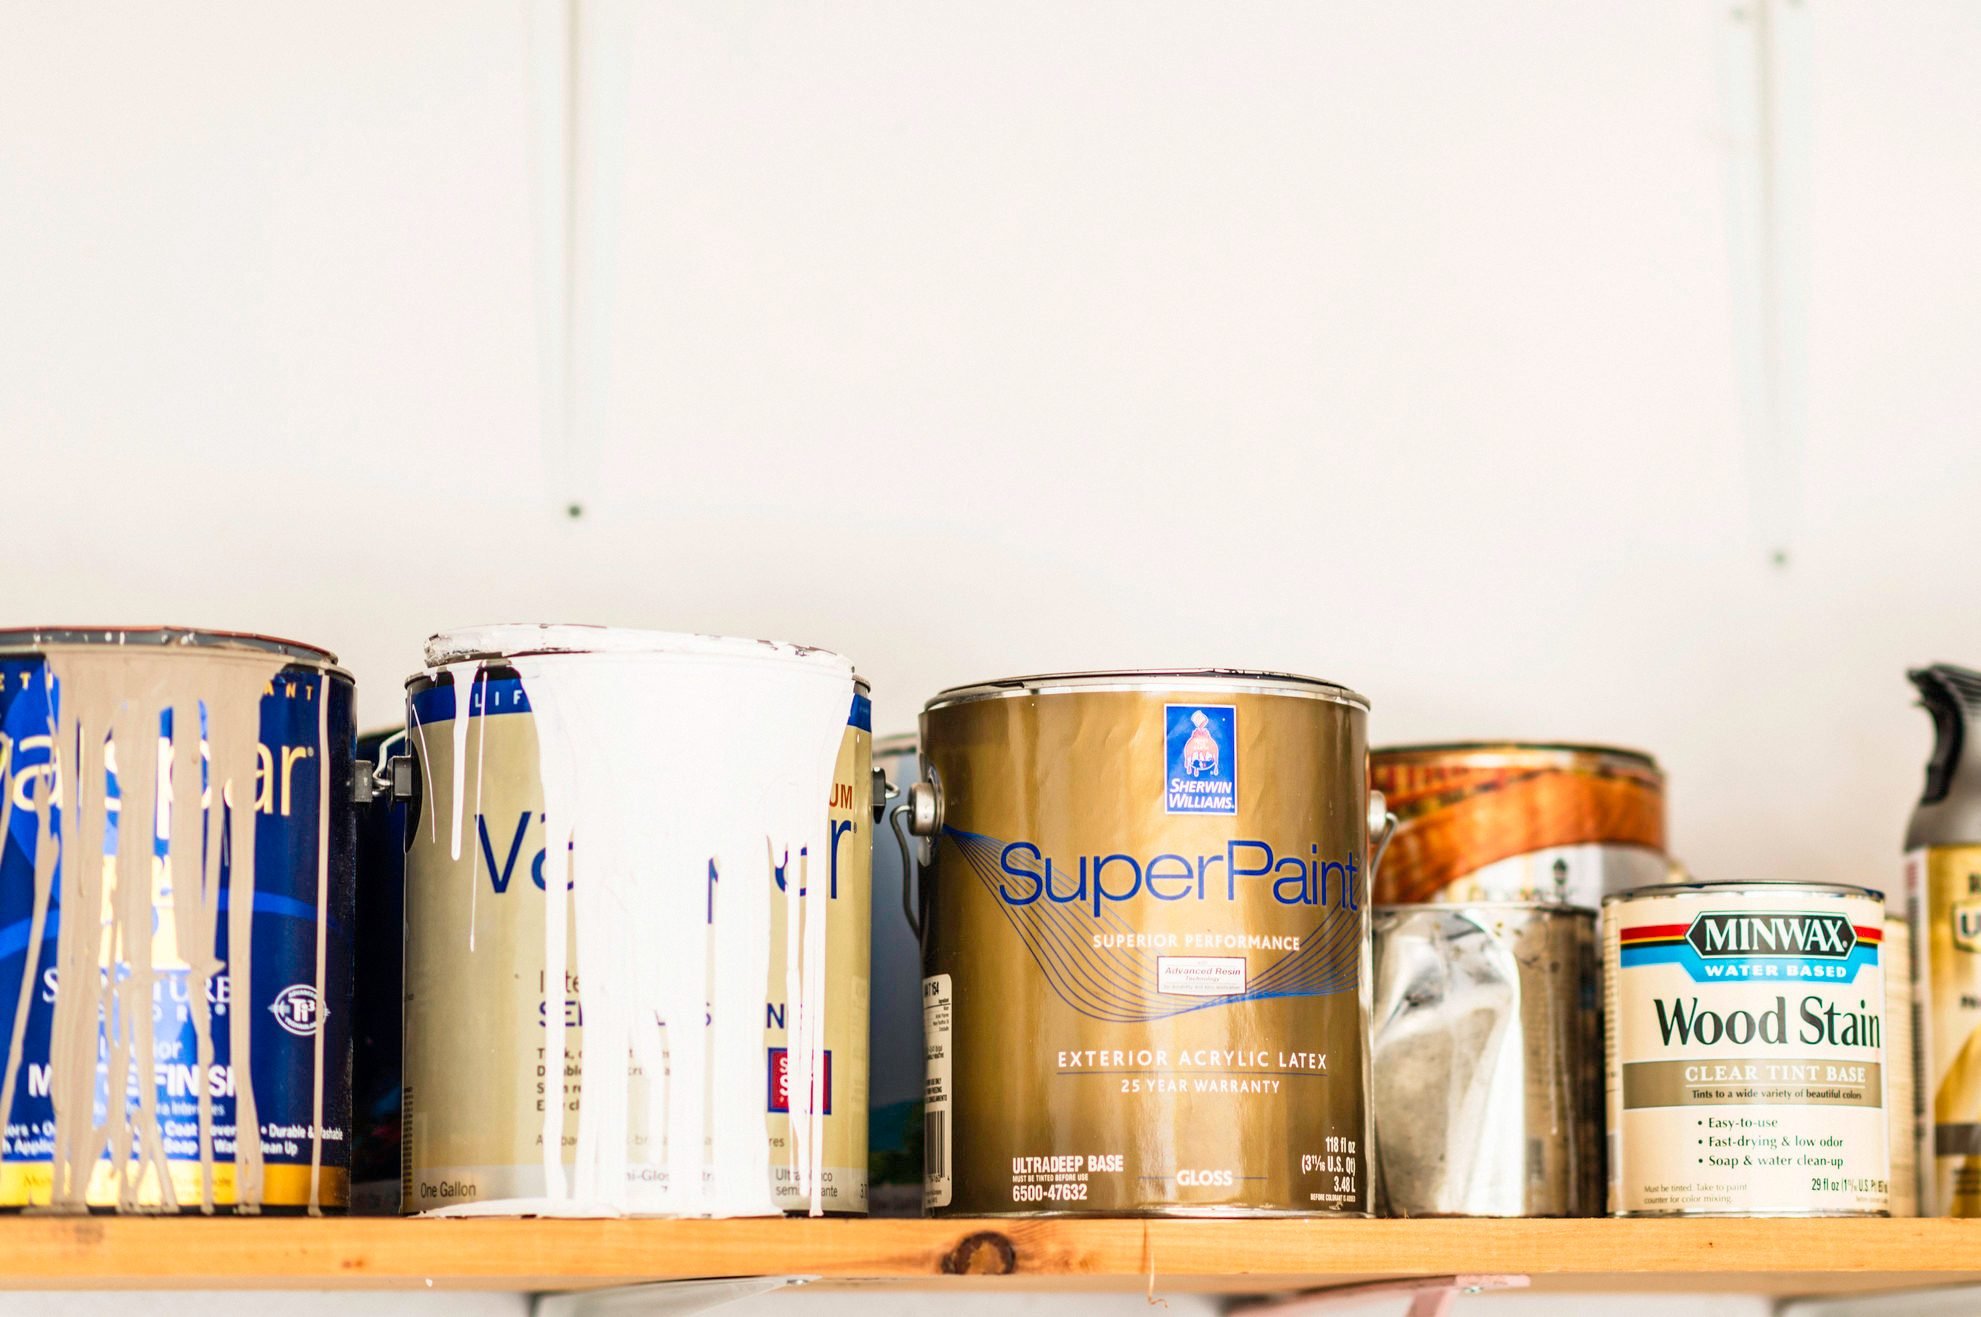 Assorted cans of paint, spray paint and wood stain.